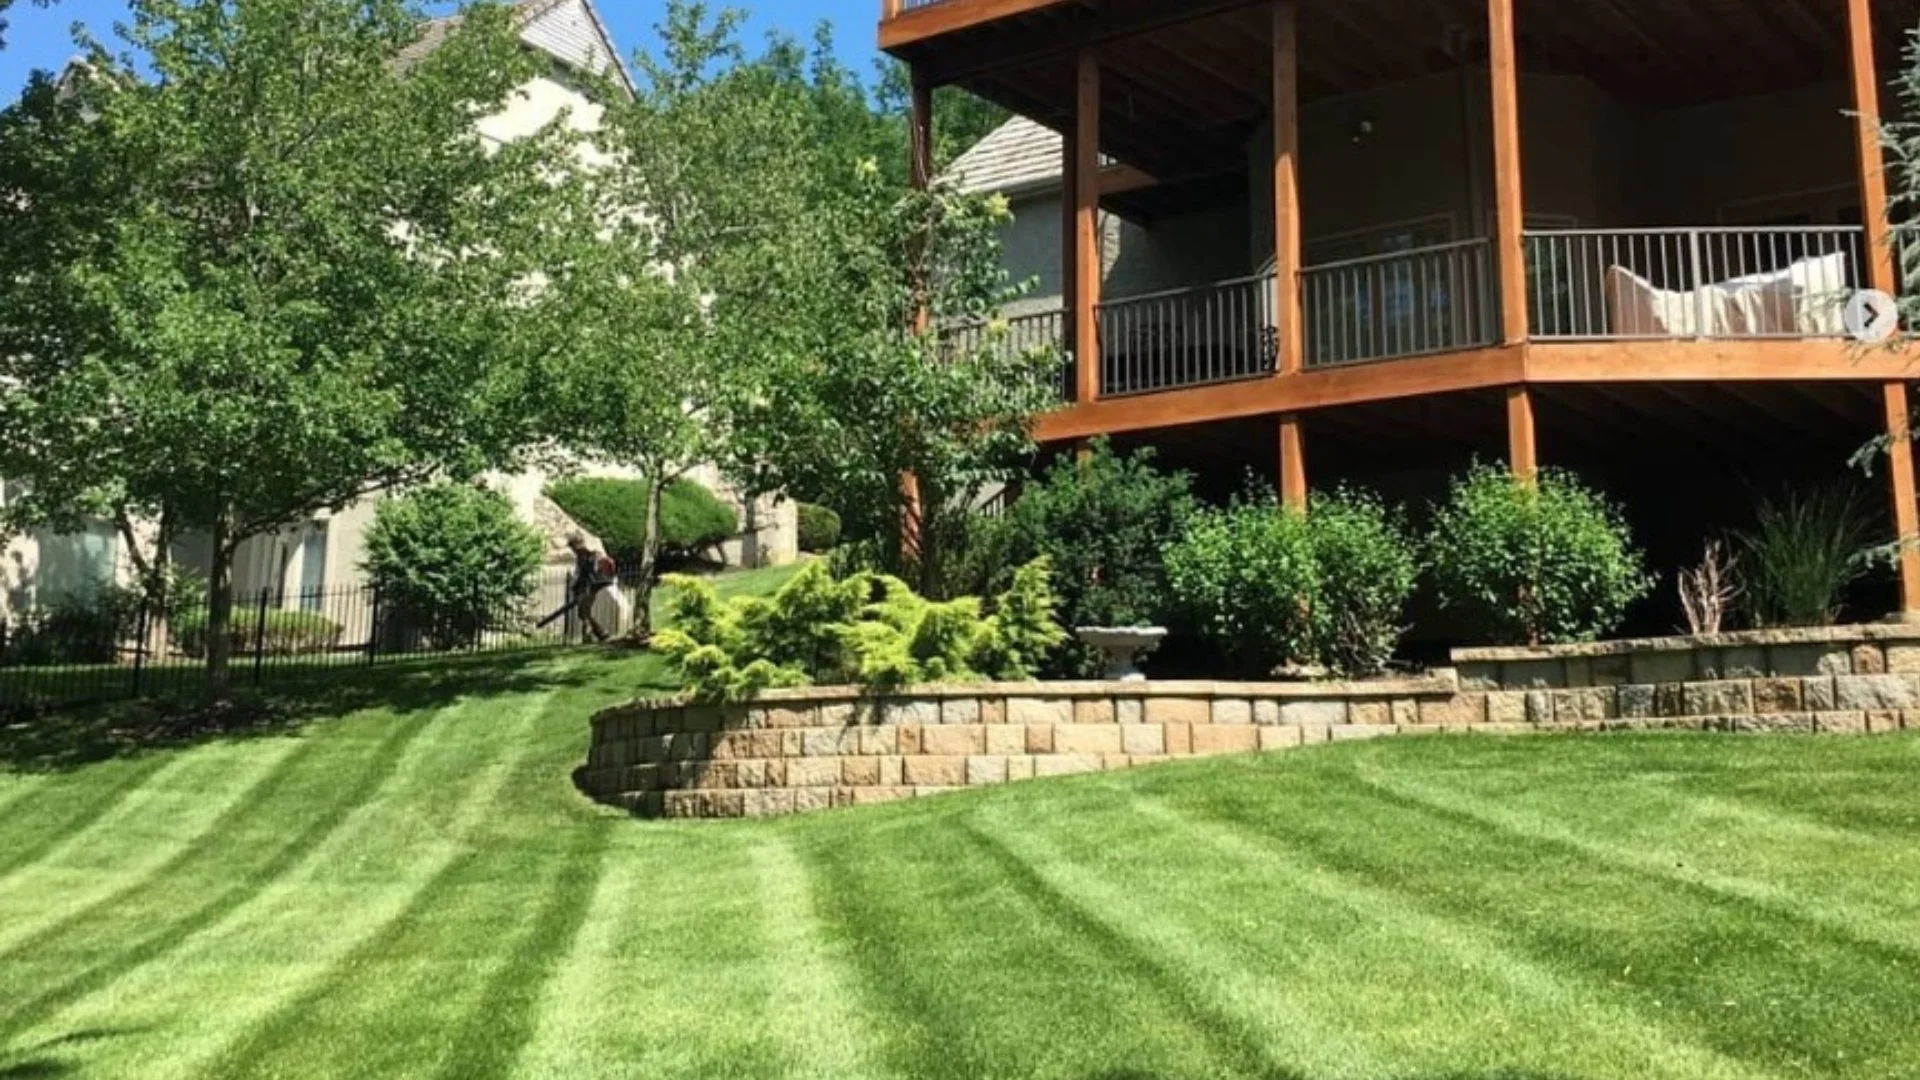 These Mistakes Are Common With DIY Lawn Mowing